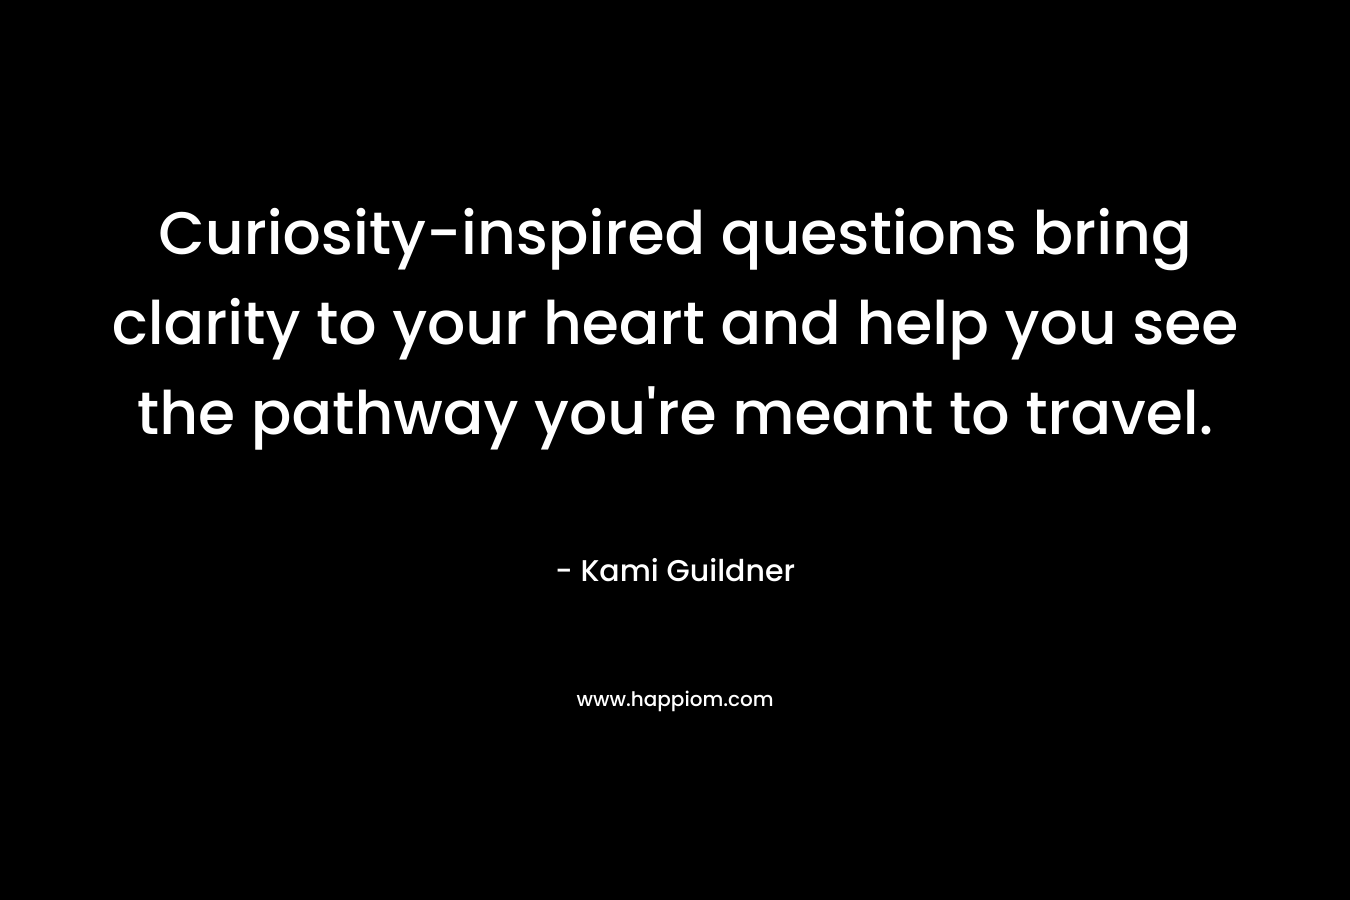 Curiosity-inspired questions bring clarity to your heart and help you see the pathway you’re meant to travel. – Kami Guildner